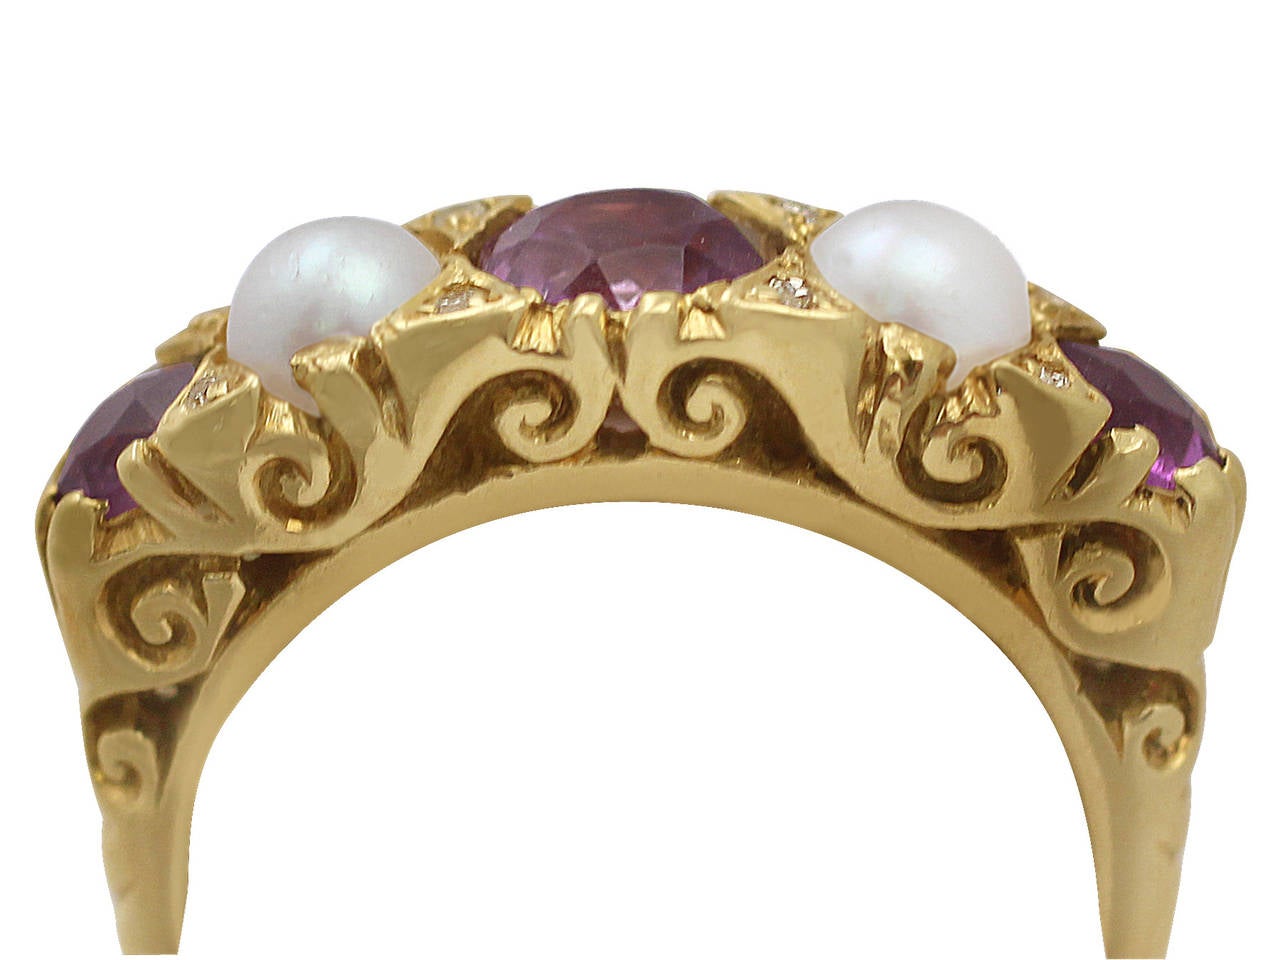 A fine and impressive vintage amethyst, pearl and 0.08 carat diamond, 18 karat yellow gold dress ring; part of our vintage jewelry/estate jewelry collections

This fine and impressive vintage dress ring has been crafted in 18k yellow gold.

The